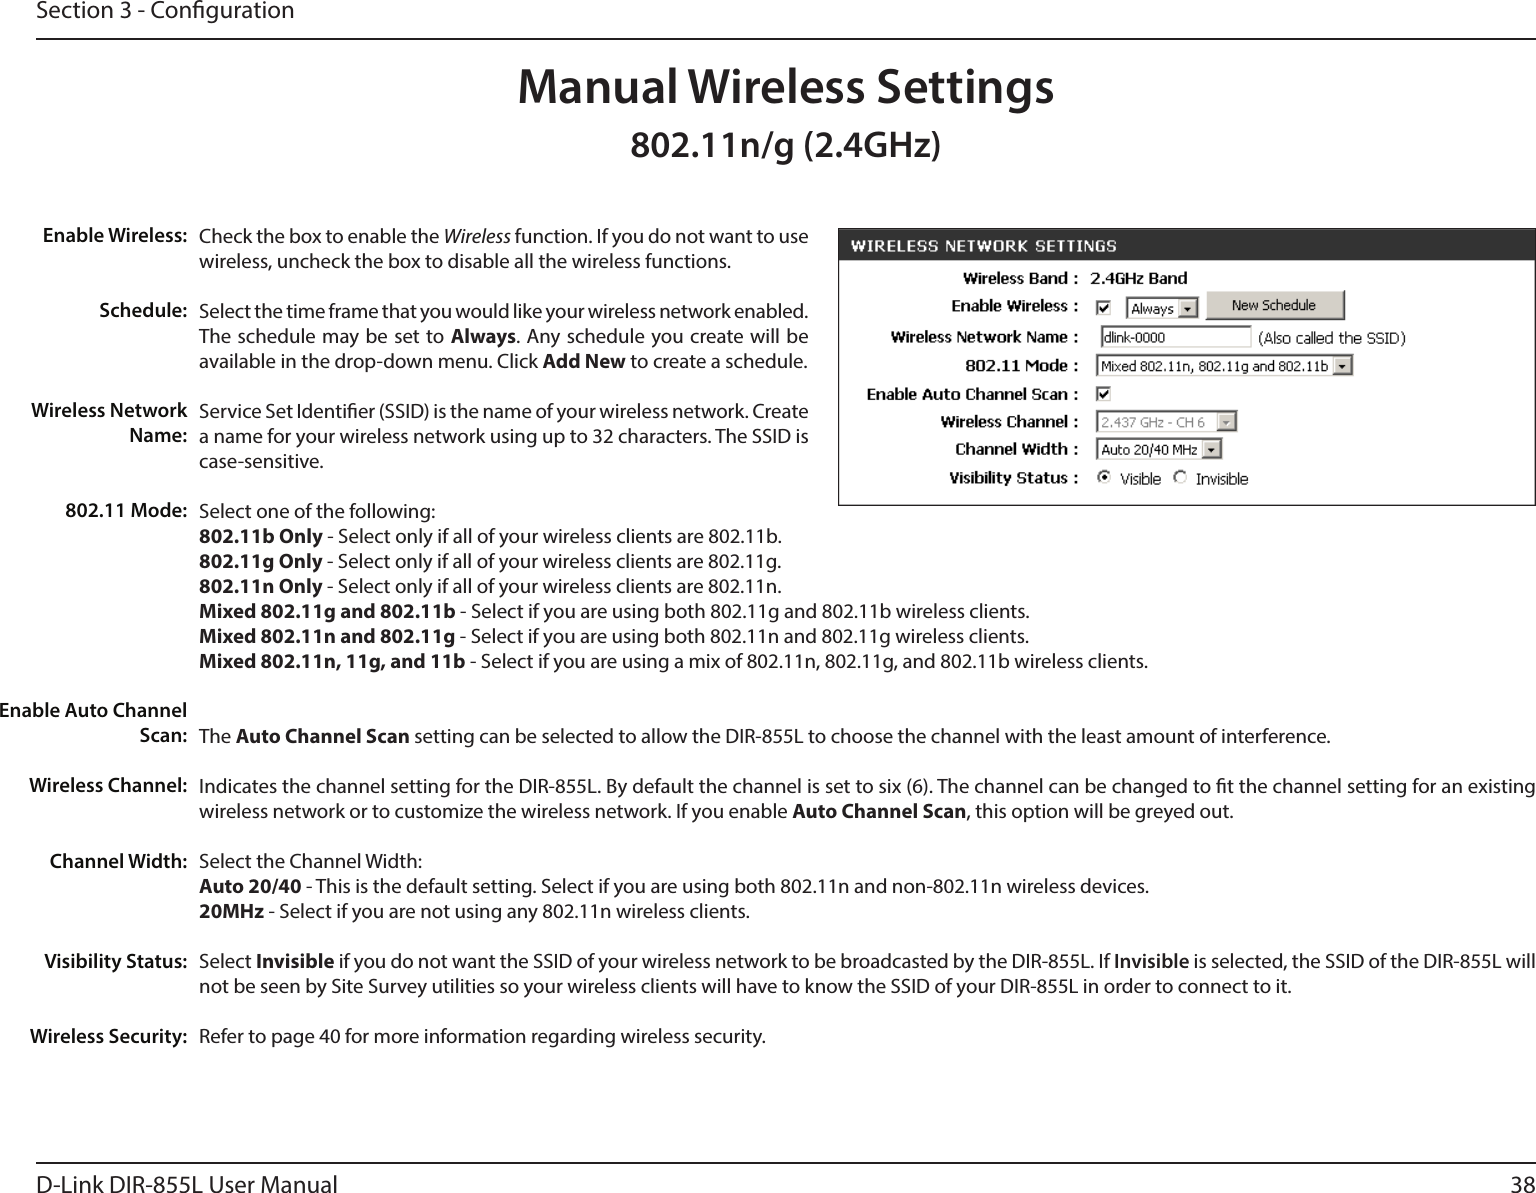 38D-Link DIR-855L User ManualSection 3 - CongurationCheck the box to enable the Wireless function. If you do not want to use wireless, uncheck the box to disable all the wireless functions.Select the time frame that you would like your wireless network enabled. The schedule may be set to Always. Any schedule you create will be available in the drop-down menu. Click Add New to create a schedule.Service Set Identier (SSID) is the name of your wireless network. Create a name for your wireless network using up to 32 characters. The SSID is case-sensitive.Select one of the following:802.11b Only - Select only if all of your wireless clients are 802.11b.802.11g Only - Select only if all of your wireless clients are 802.11g.802.11n Only - Select only if all of your wireless clients are 802.11n.Mixed 802.11g and 802.11b - Select if you are using both 802.11g and 802.11b wireless clients.Mixed 802.11n and 802.11g - Select if you are using both 802.11n and 802.11g wireless clients.Mixed 802.11n, 11g, and 11b - Select if you are using a mix of 802.11n, 802.11g, and 802.11b wireless clients.The Auto Channel Scan setting can be selected to allow the DIR-855L to choose the channel with the least amount of interference.Indicates the channel setting for the DIR-855L. By default the channel is set to six (6). The channel can be changed to t the channel setting for an existing wireless network or to customize the wireless network. If you enable Auto Channel Scan, this option will be greyed out.Select the Channel Width:Auto 20/40 - This is the default setting. Select if you are using both 802.11n and non-802.11n wireless devices.20MHz - Select if you are not using any 802.11n wireless clients.Select Invisible if you do not want the SSID of your wireless network to be broadcasted by the DIR-855L. If Invisible is selected, the SSID of the DIR-855L will not be seen by Site Survey utilities so your wireless clients will have to know the SSID of your DIR-855L in order to connect to it.Refer to page 40 for more information regarding wireless security.Enable Wireless:Schedule:Wireless Network Name:802.11 Mode:Enable Auto Channel Scan:Wireless Channel:Manual Wireless SettingsChannel Width:Visibility Status:Wireless Security:802.11n/g (2.4GHz)